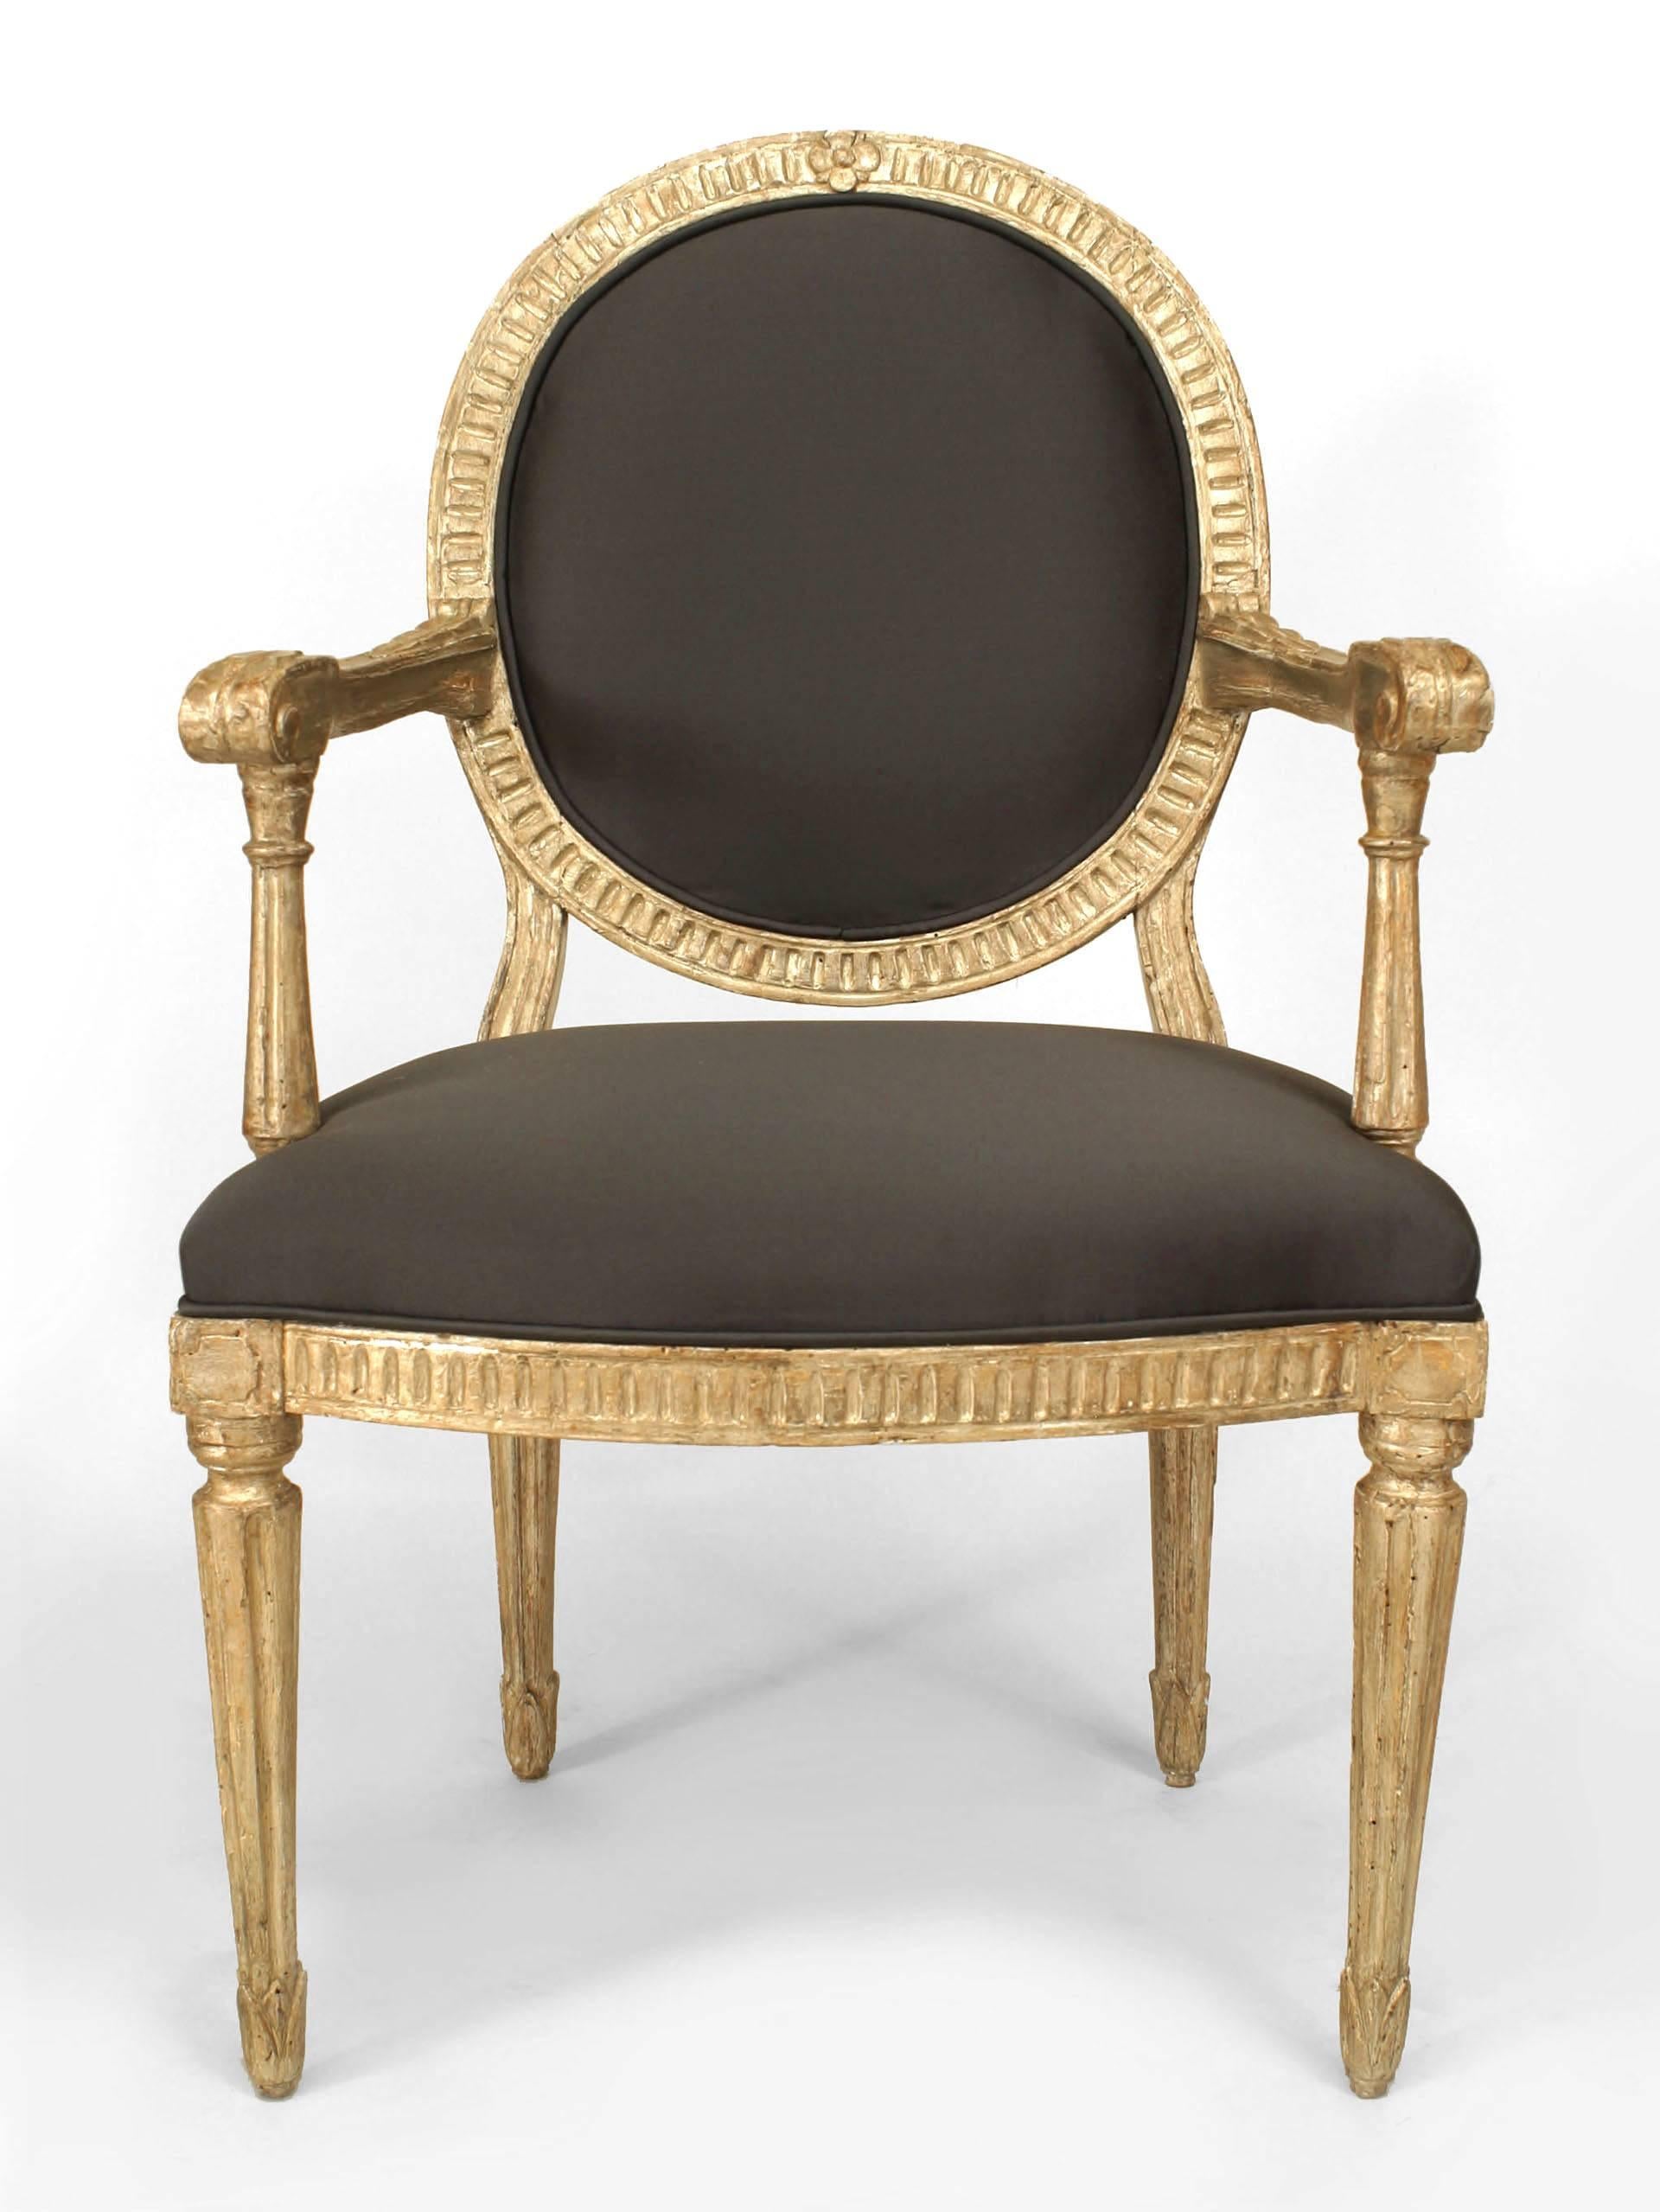 Set of 4 Italian Neo-classic (18th Cent) silver gilt arm chairs with carved fluted design oval back, seat rail and legs with upholstered seat & back.
